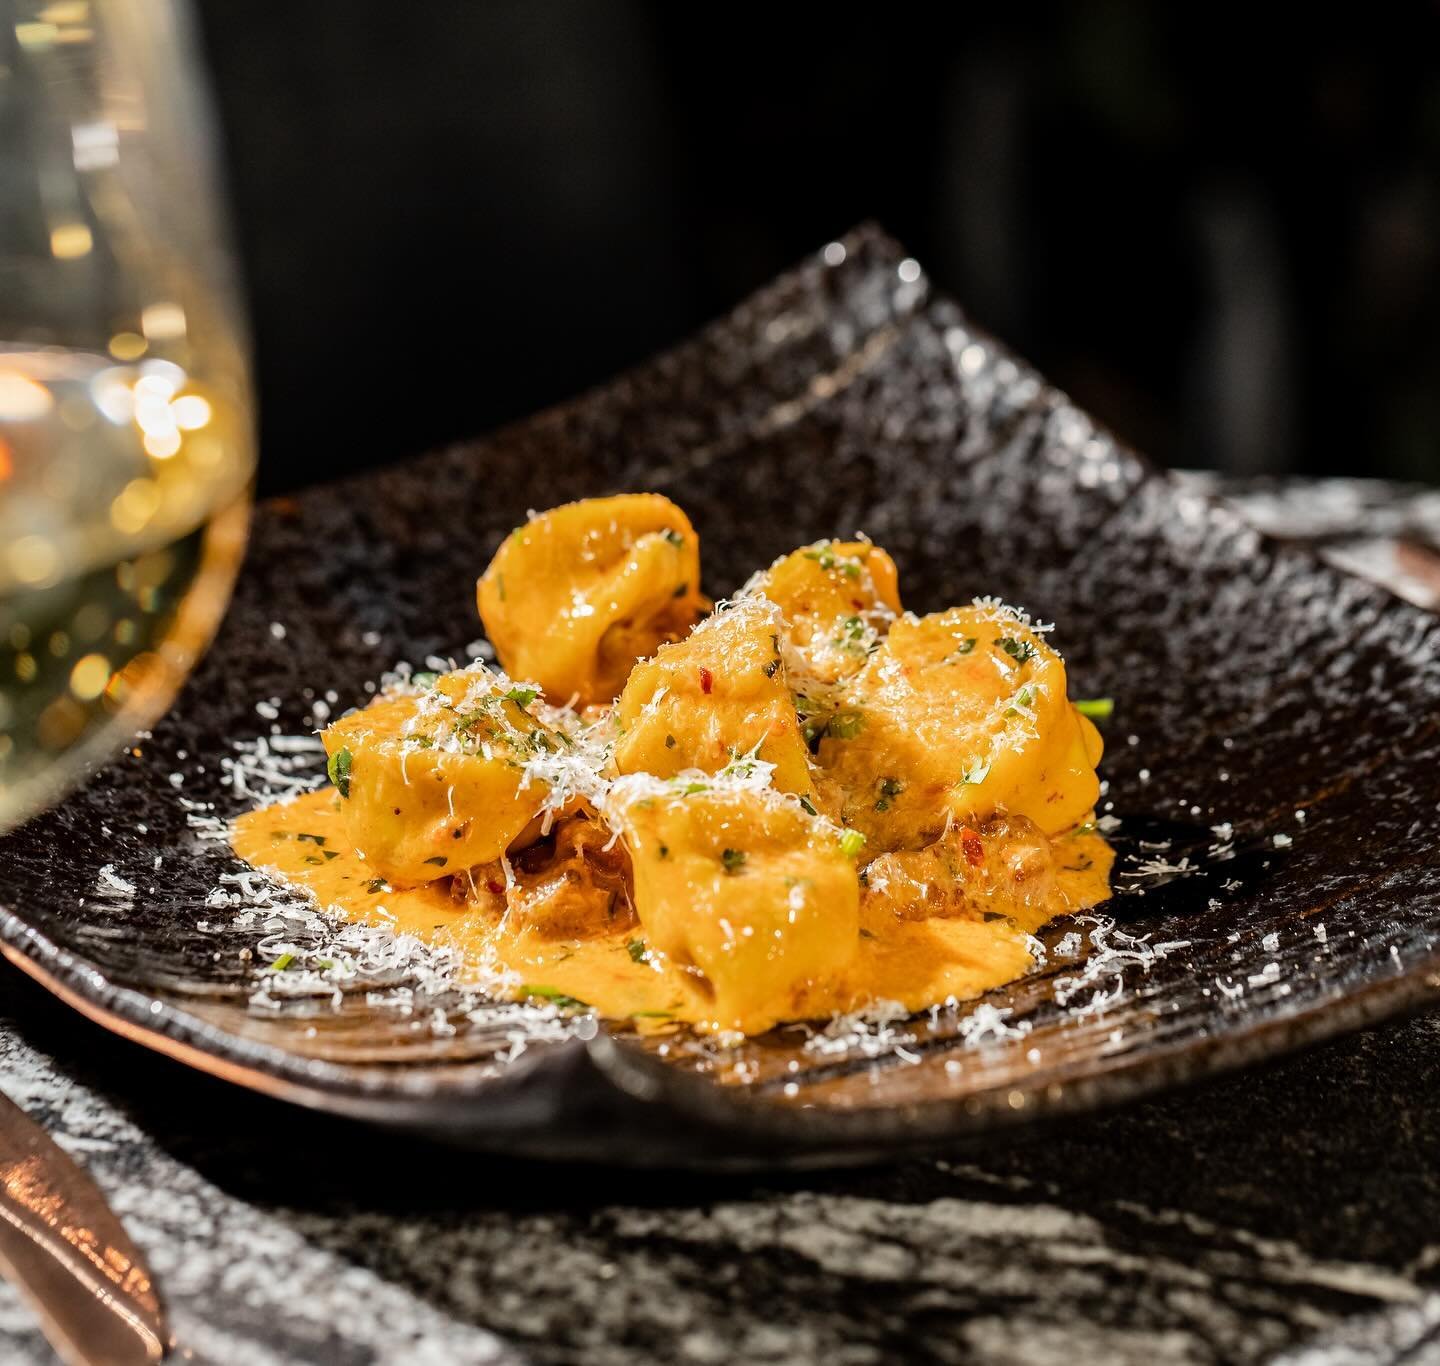 Spice up your weekend at The Saint with our Gorgonzola Tortellini, with a House Made Spicy Italian Sausage Ragu.